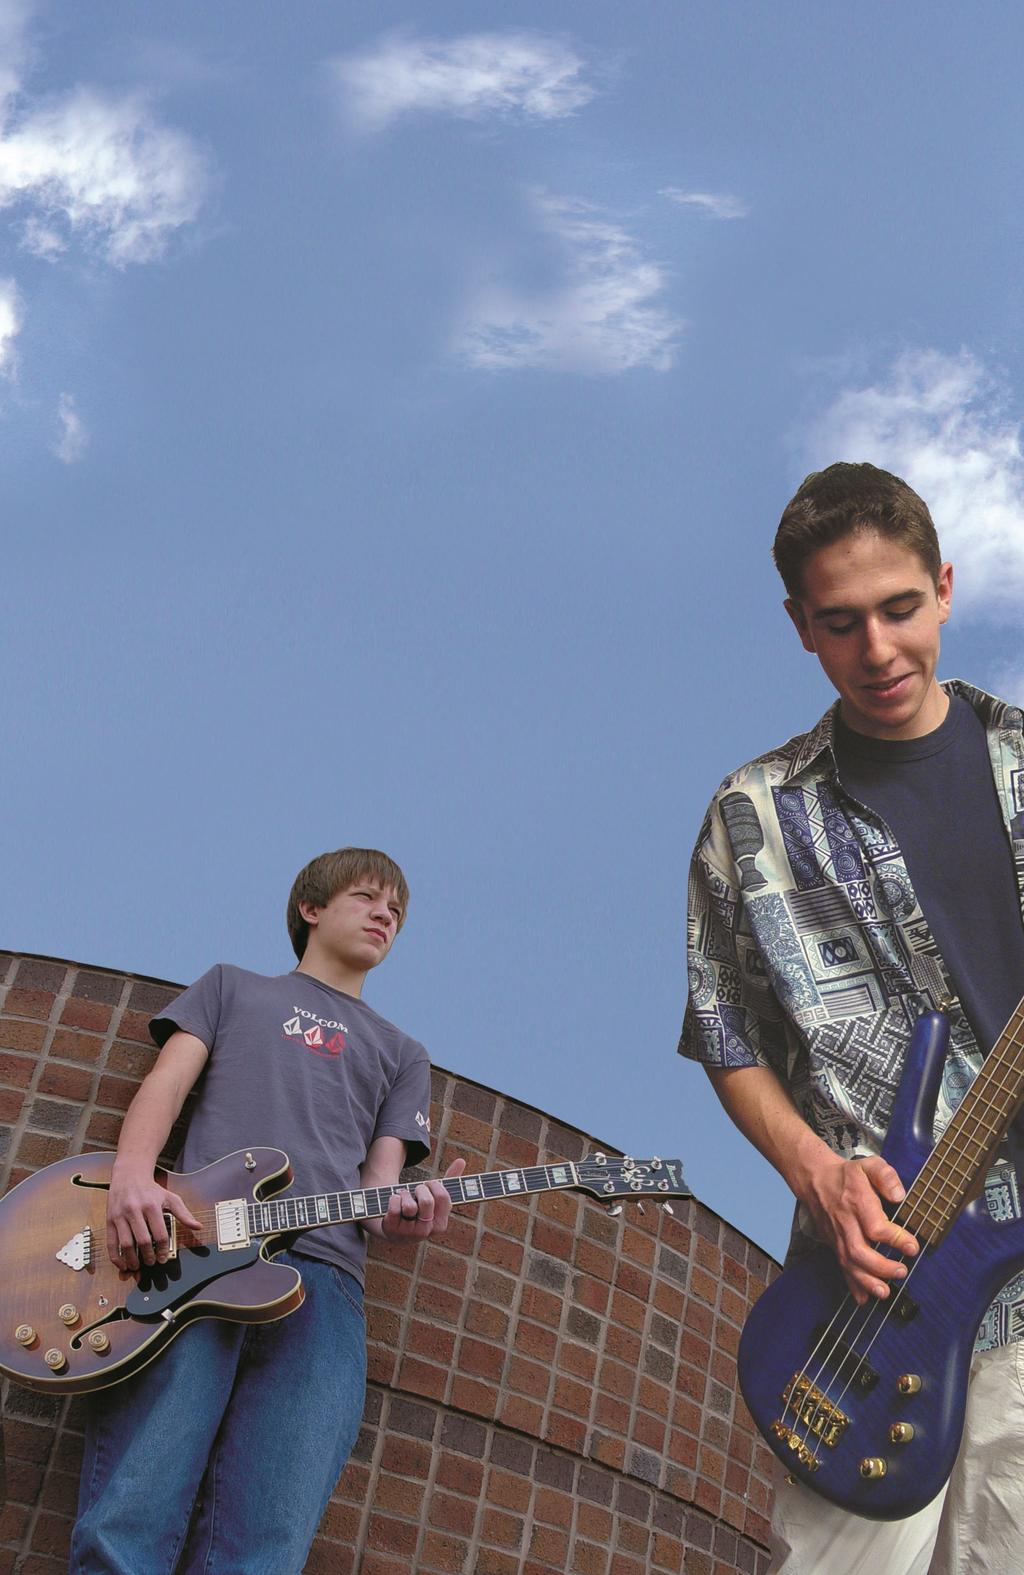 What is Cross Rock? Cross Rock is a Christian rock music program that provides weekend, holiday and summer camp experiences for young musicians ages 9 to 18.